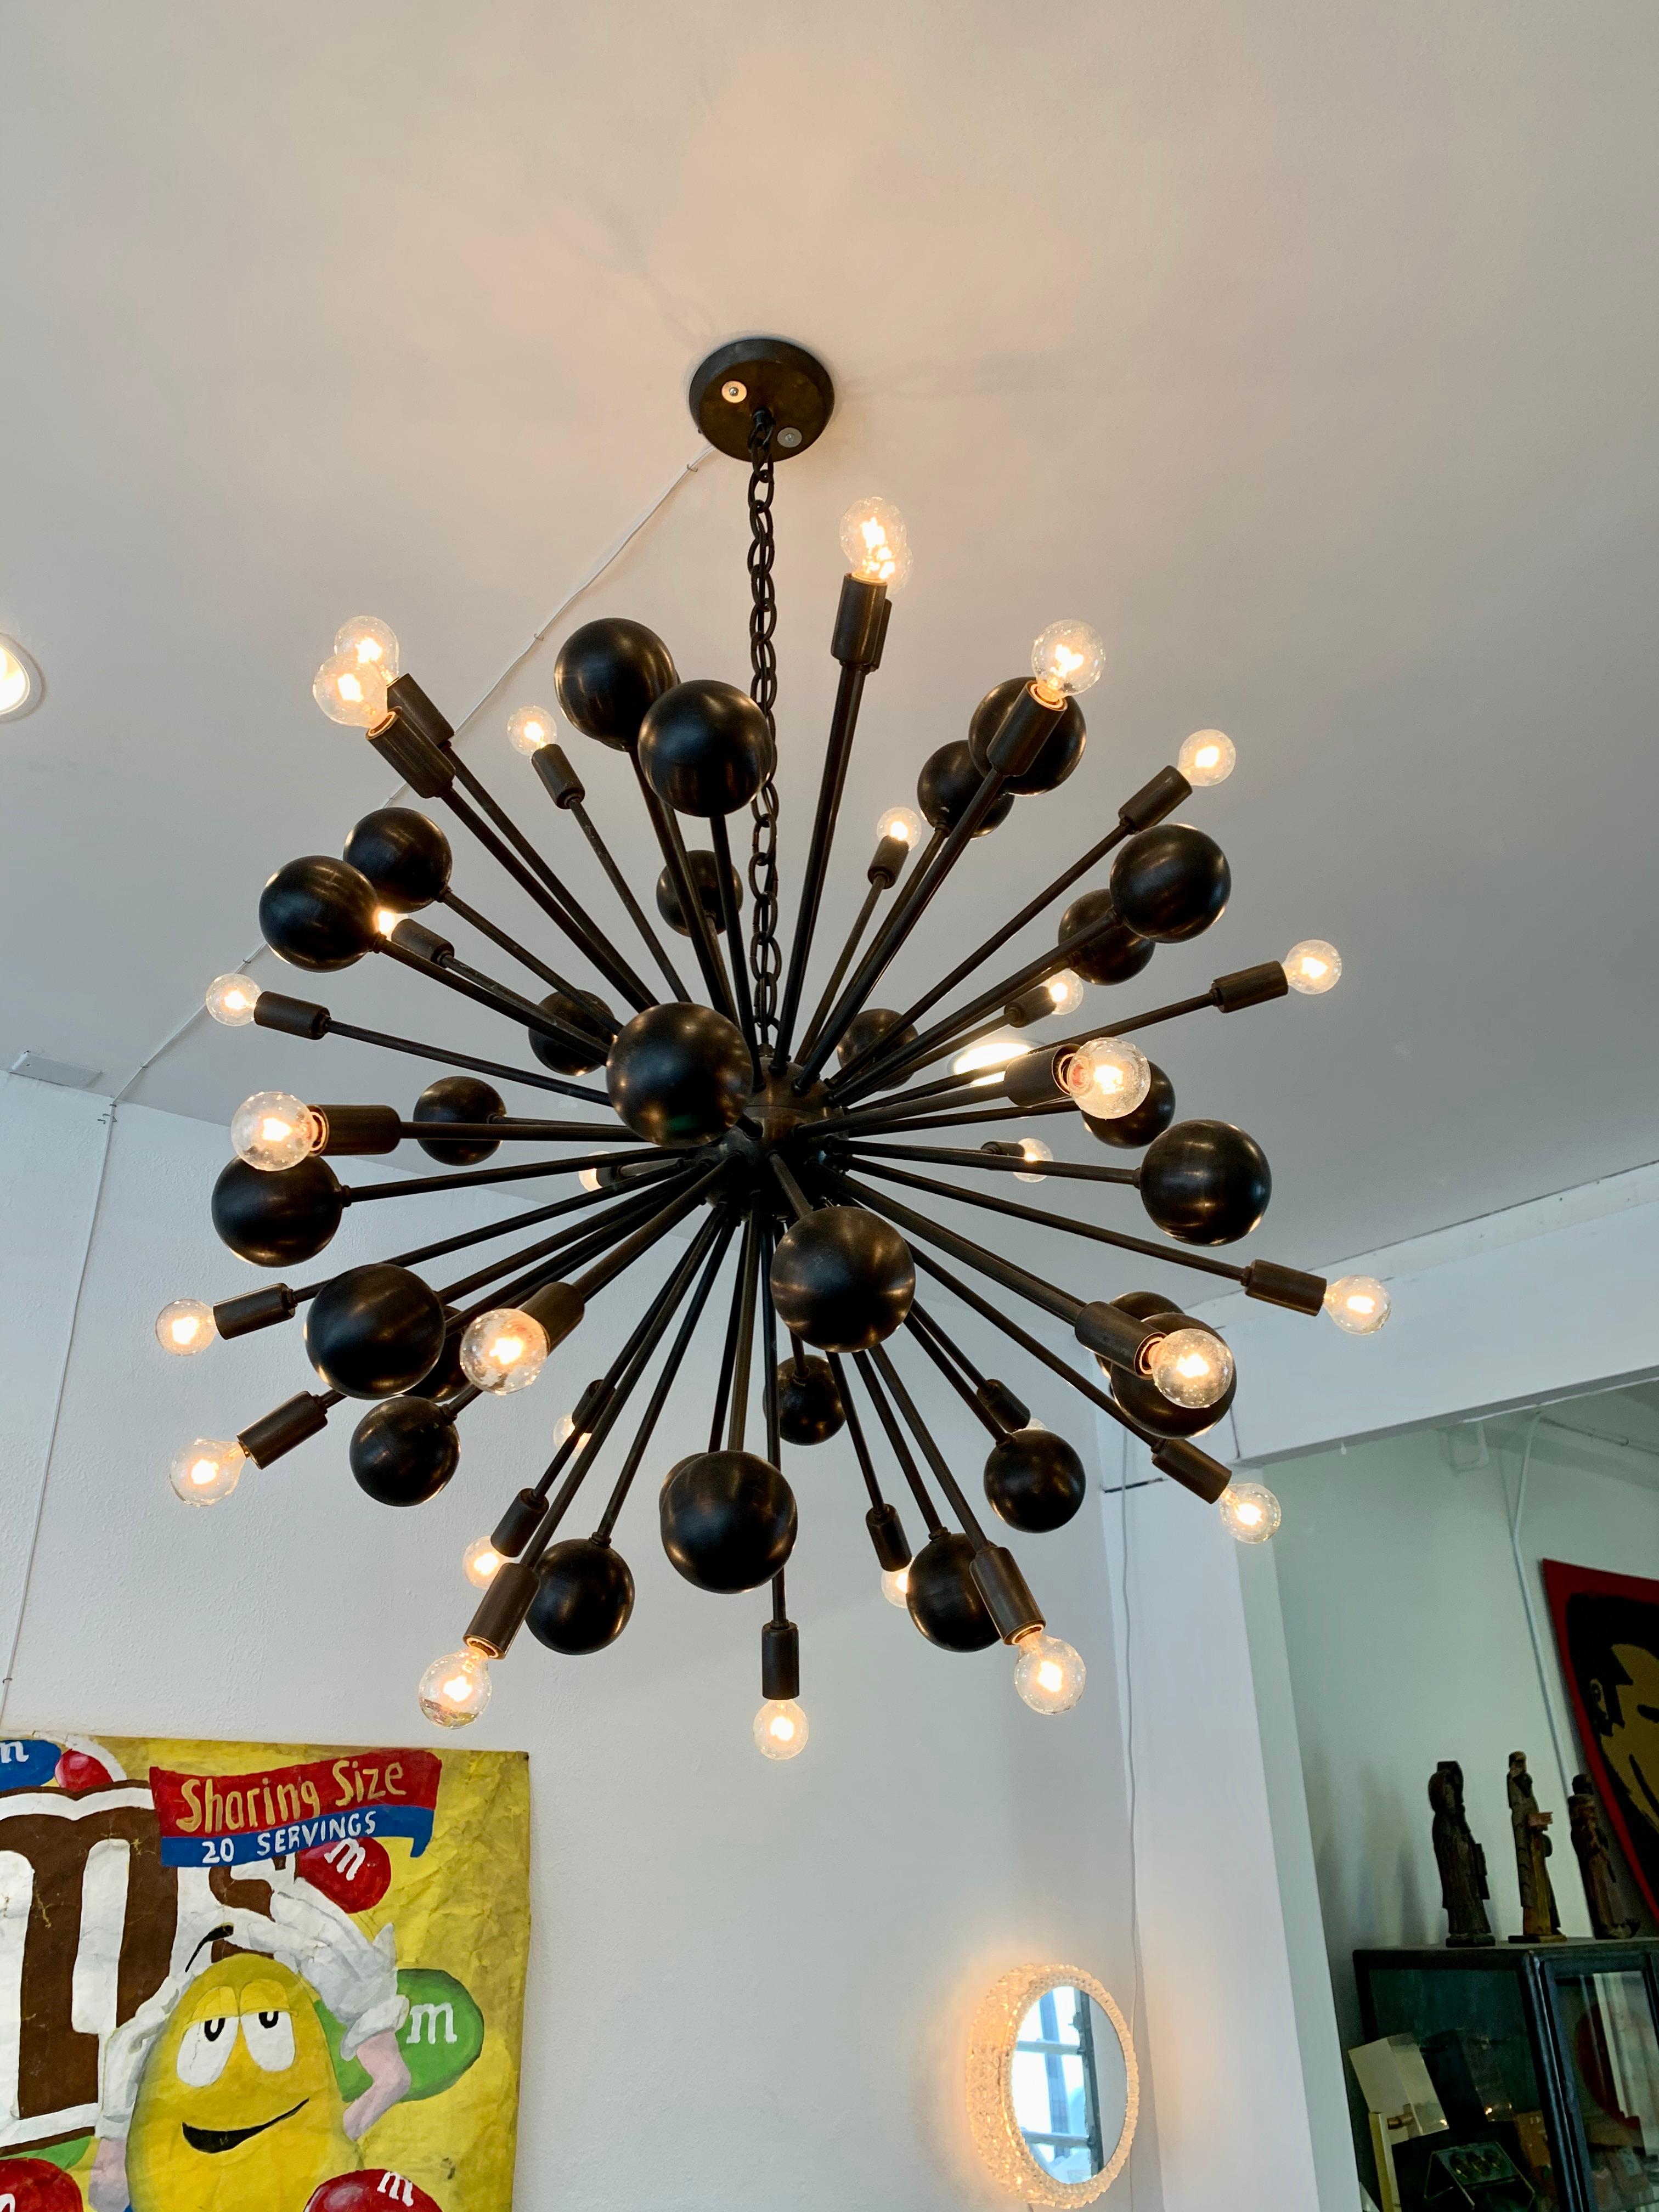 Giant Sputnik chandelier with 60 arms radiating from a central orb. Finished in oil rubbed bronze. 30 arms with lights and 30 arms with metal balls. Fixture is 36